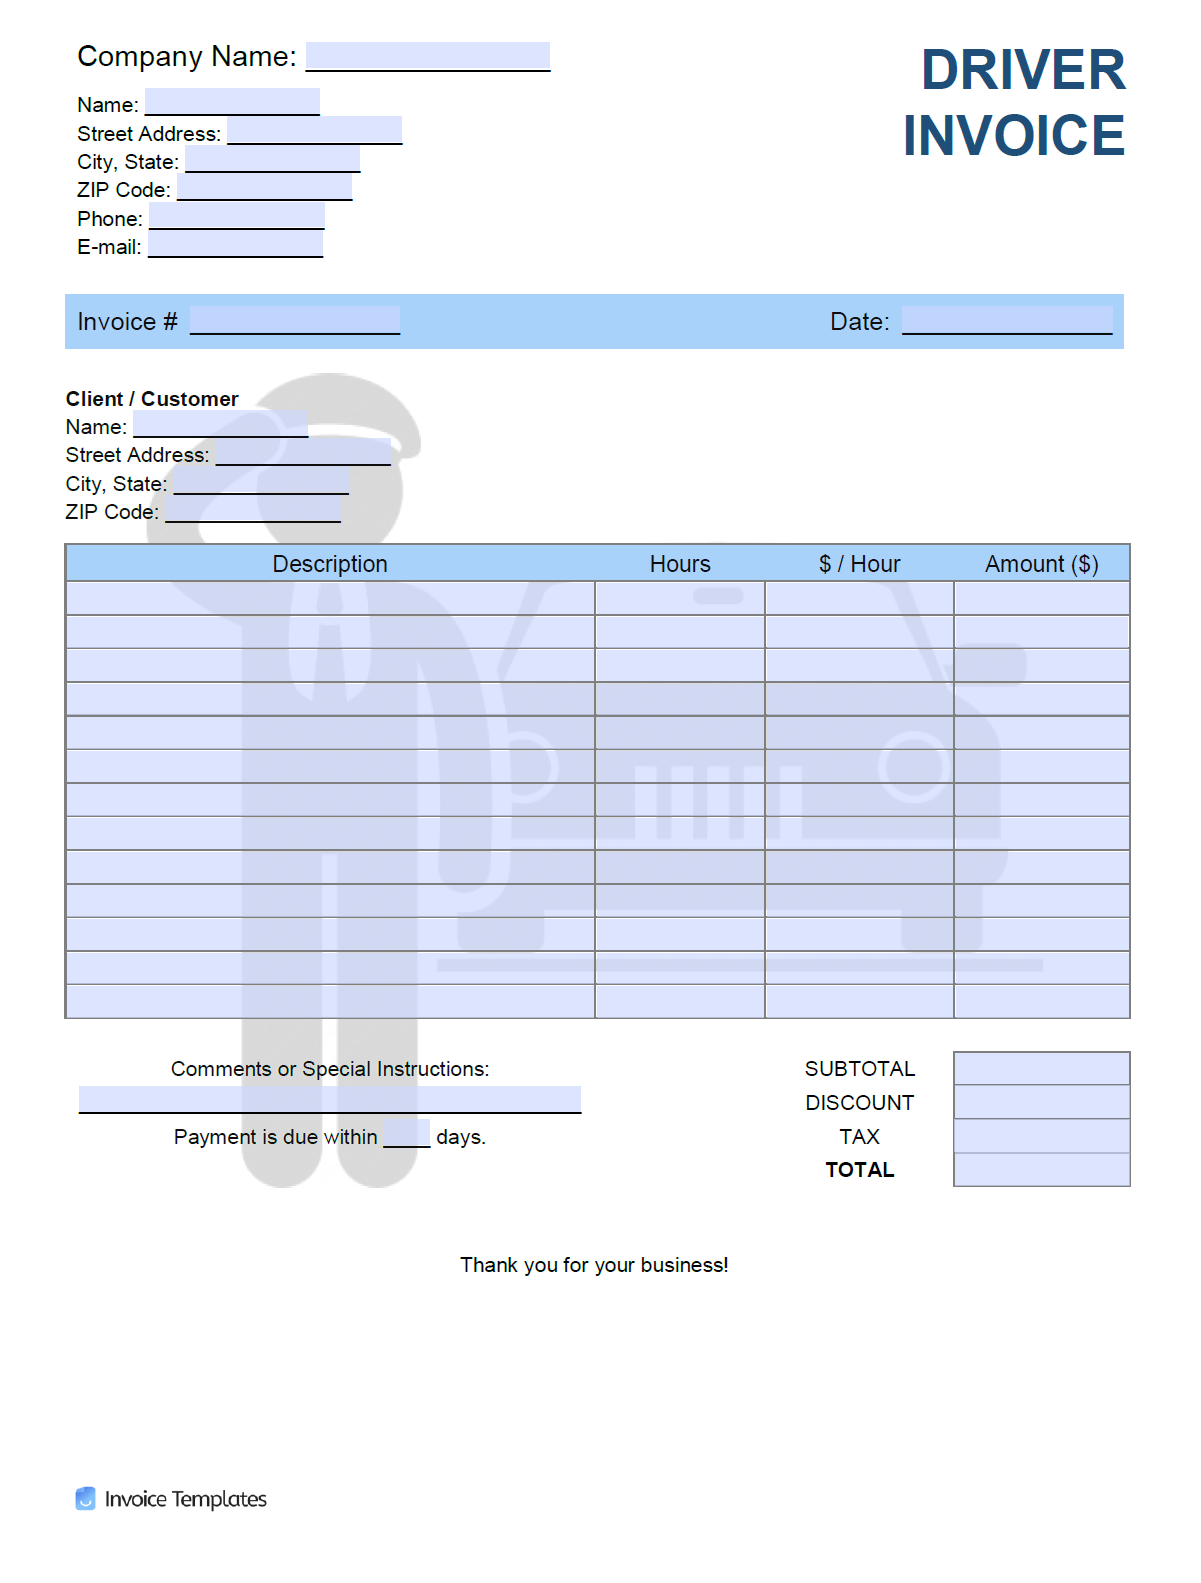 Free Driver (Chauffeur) Invoice Template  PDF  WORD  EXCEL Intended For Trucking Company Invoice Template